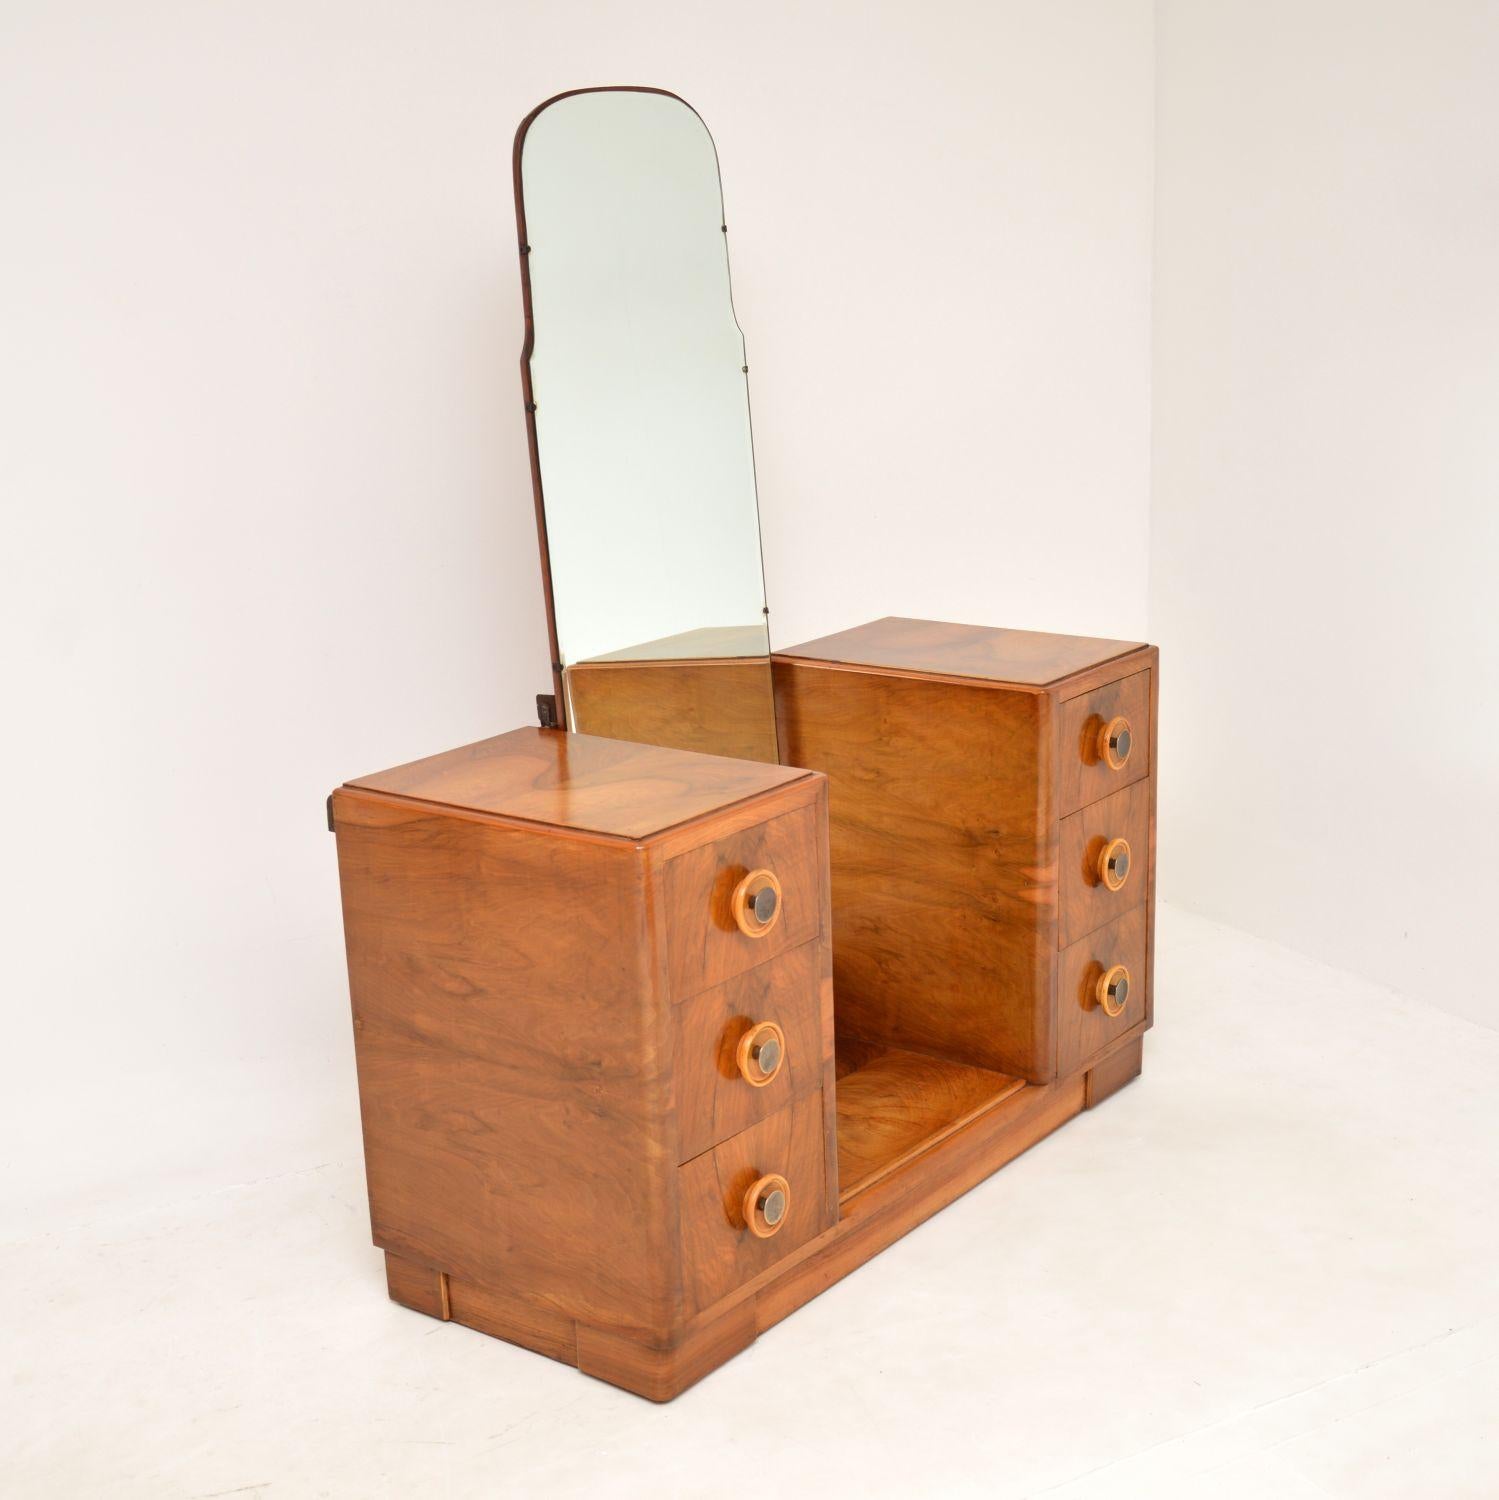 A superb original Art Deco period dressing table in walnut. This was made in England, it dates from the 1920-30’s.

It is of great quality and has a very stylish design. The figured walnut grain patterns are gorgeous, and this has a lovely colour